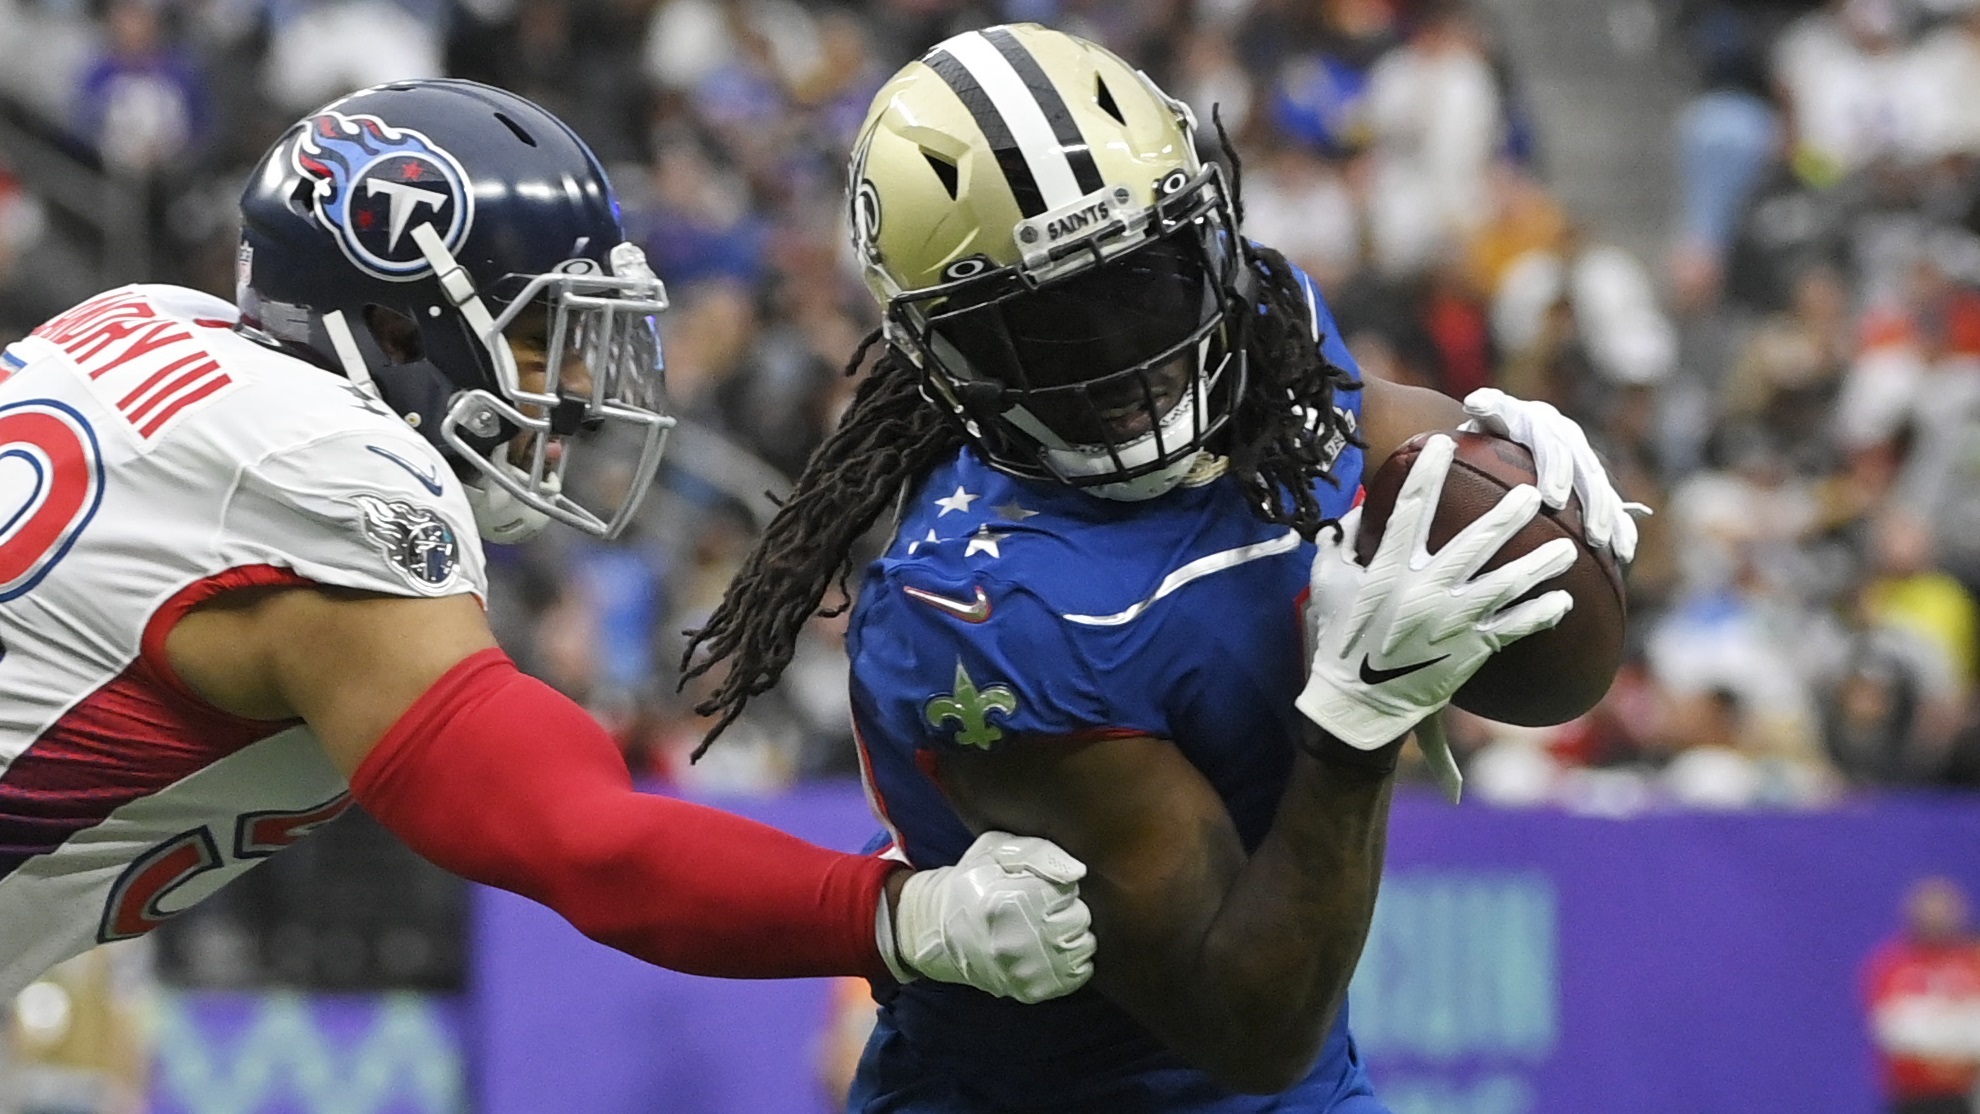 Alvin Kamara (41) rushes against Harold Landry (58) during the first half of the Pro Bowl NFL football game.